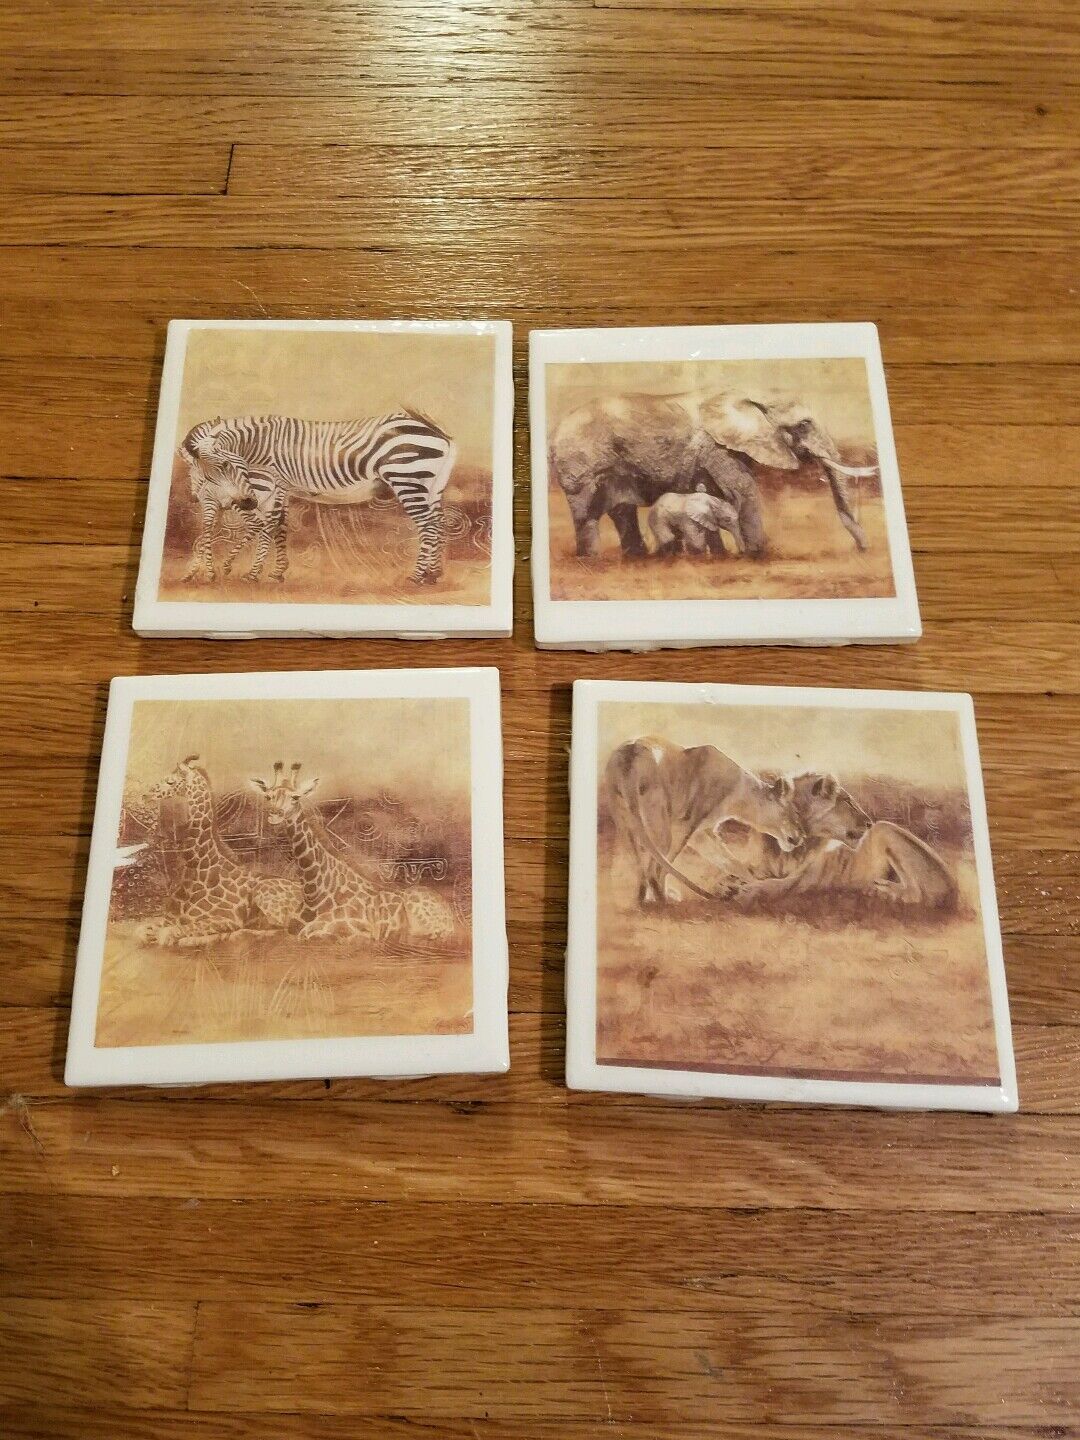 African Quality inspection Max 41% OFF Animal themed 4x4 Ceramic Handmade set of 4 Coasters